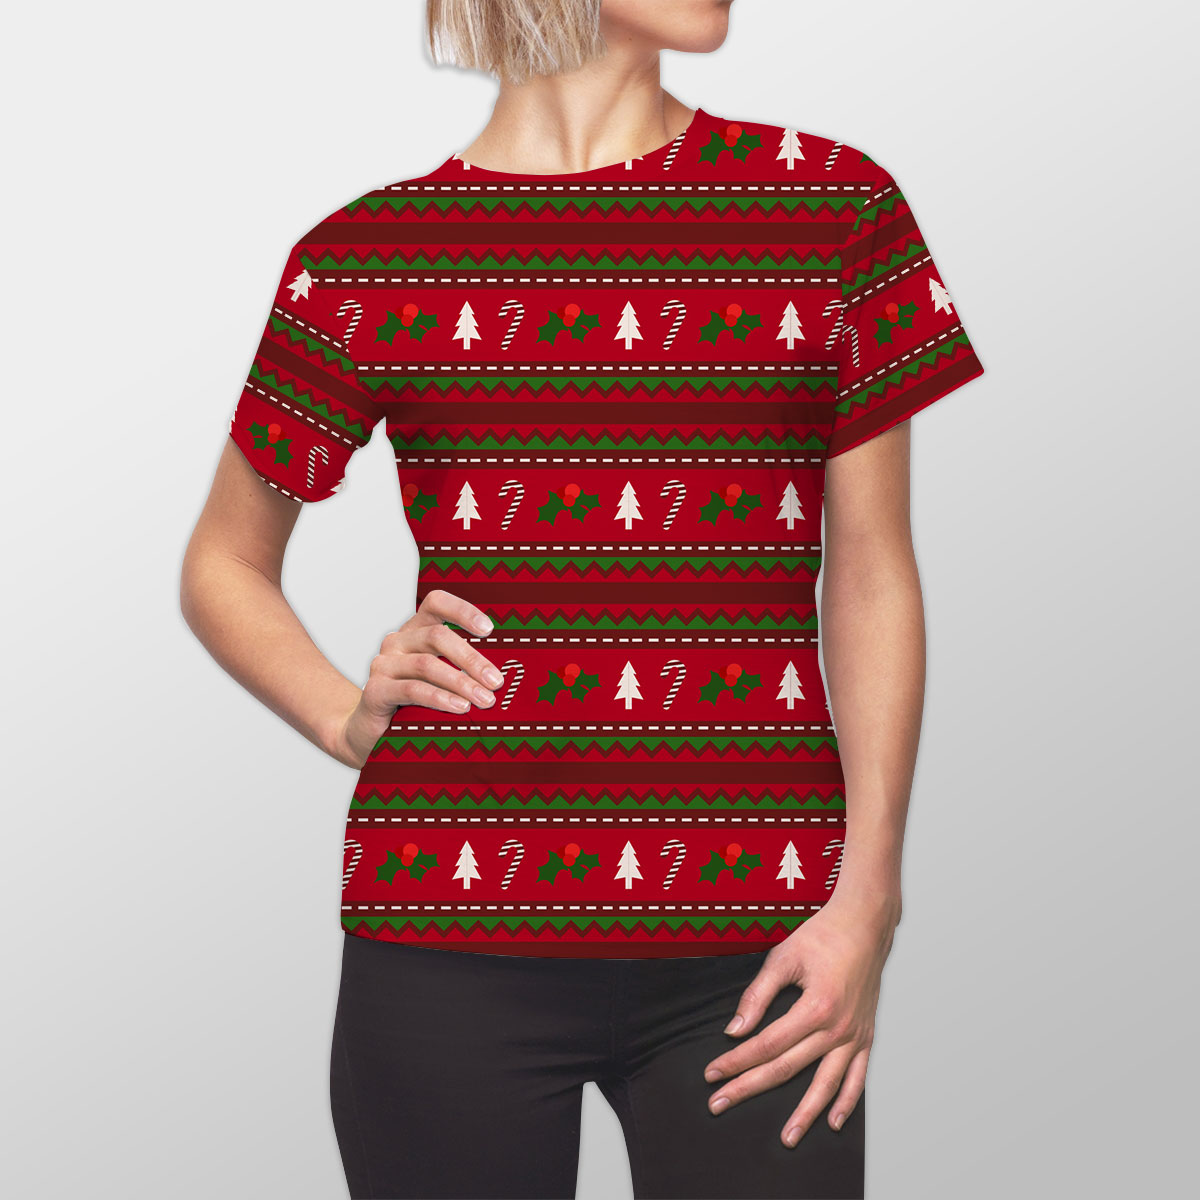 Red Green And White Christmas Tree, Holly Leaf With Candy Cane.jpg Women Cut Sew Tee